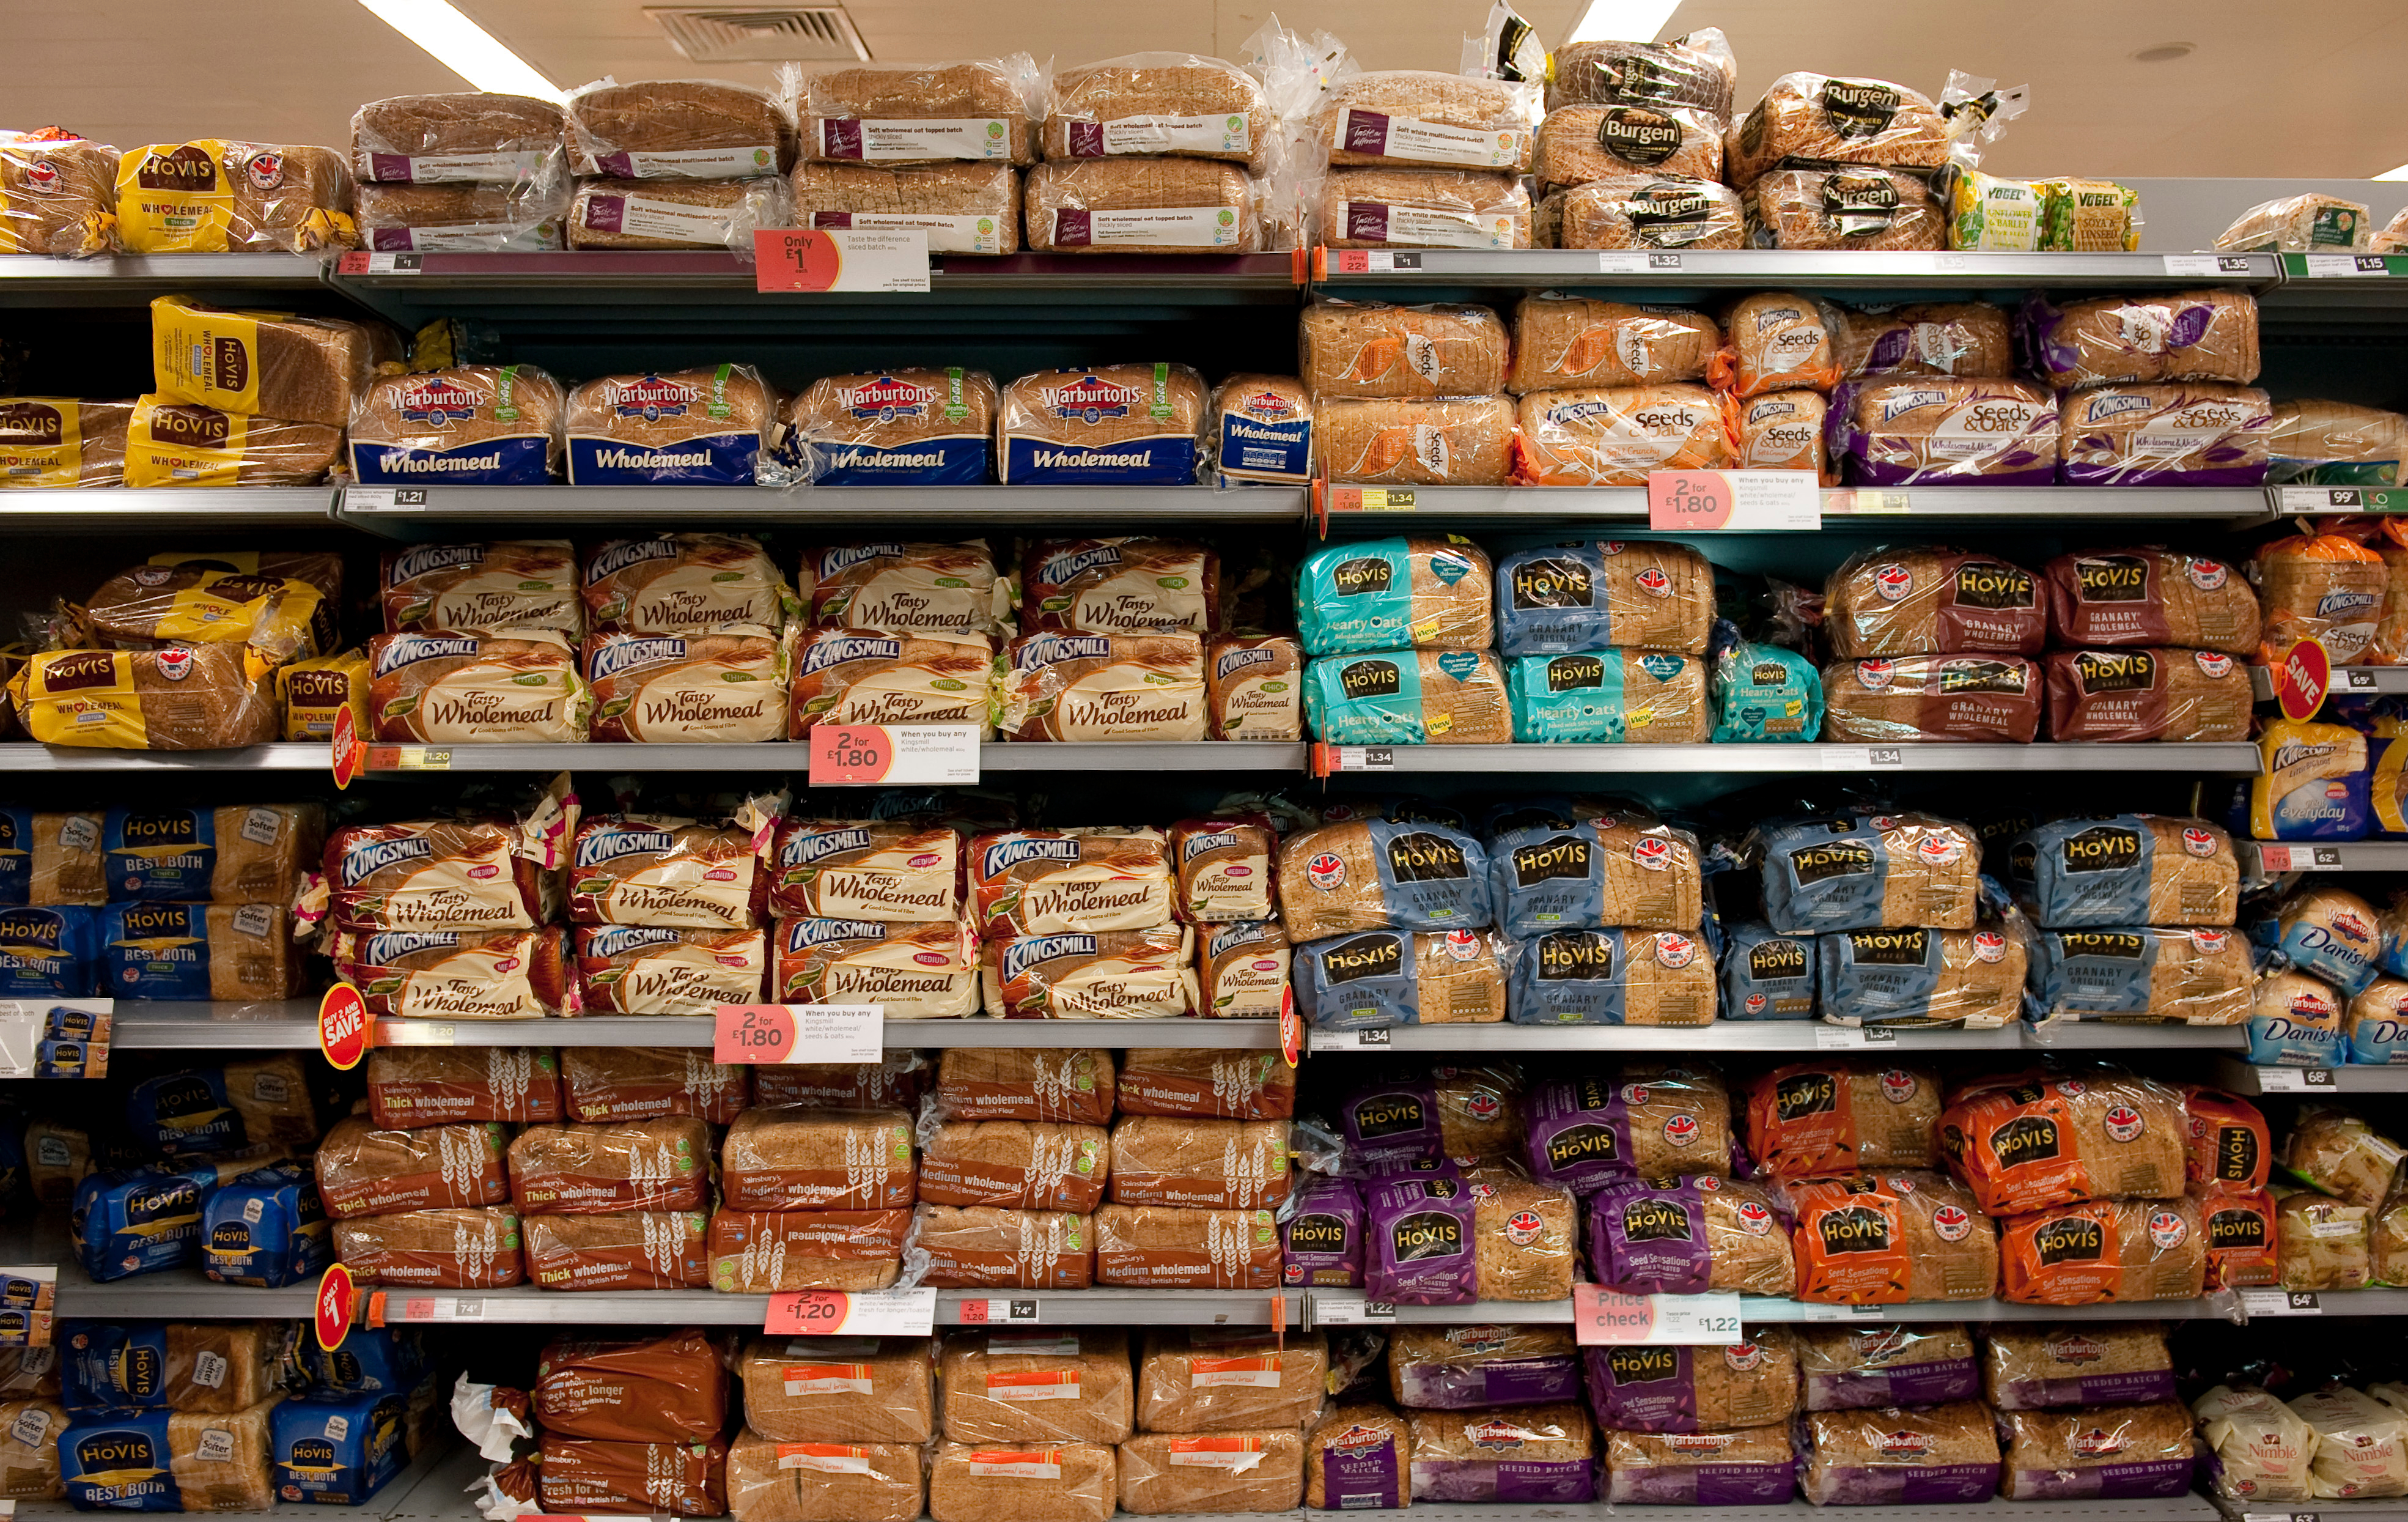 The bread aisle in a supermarket